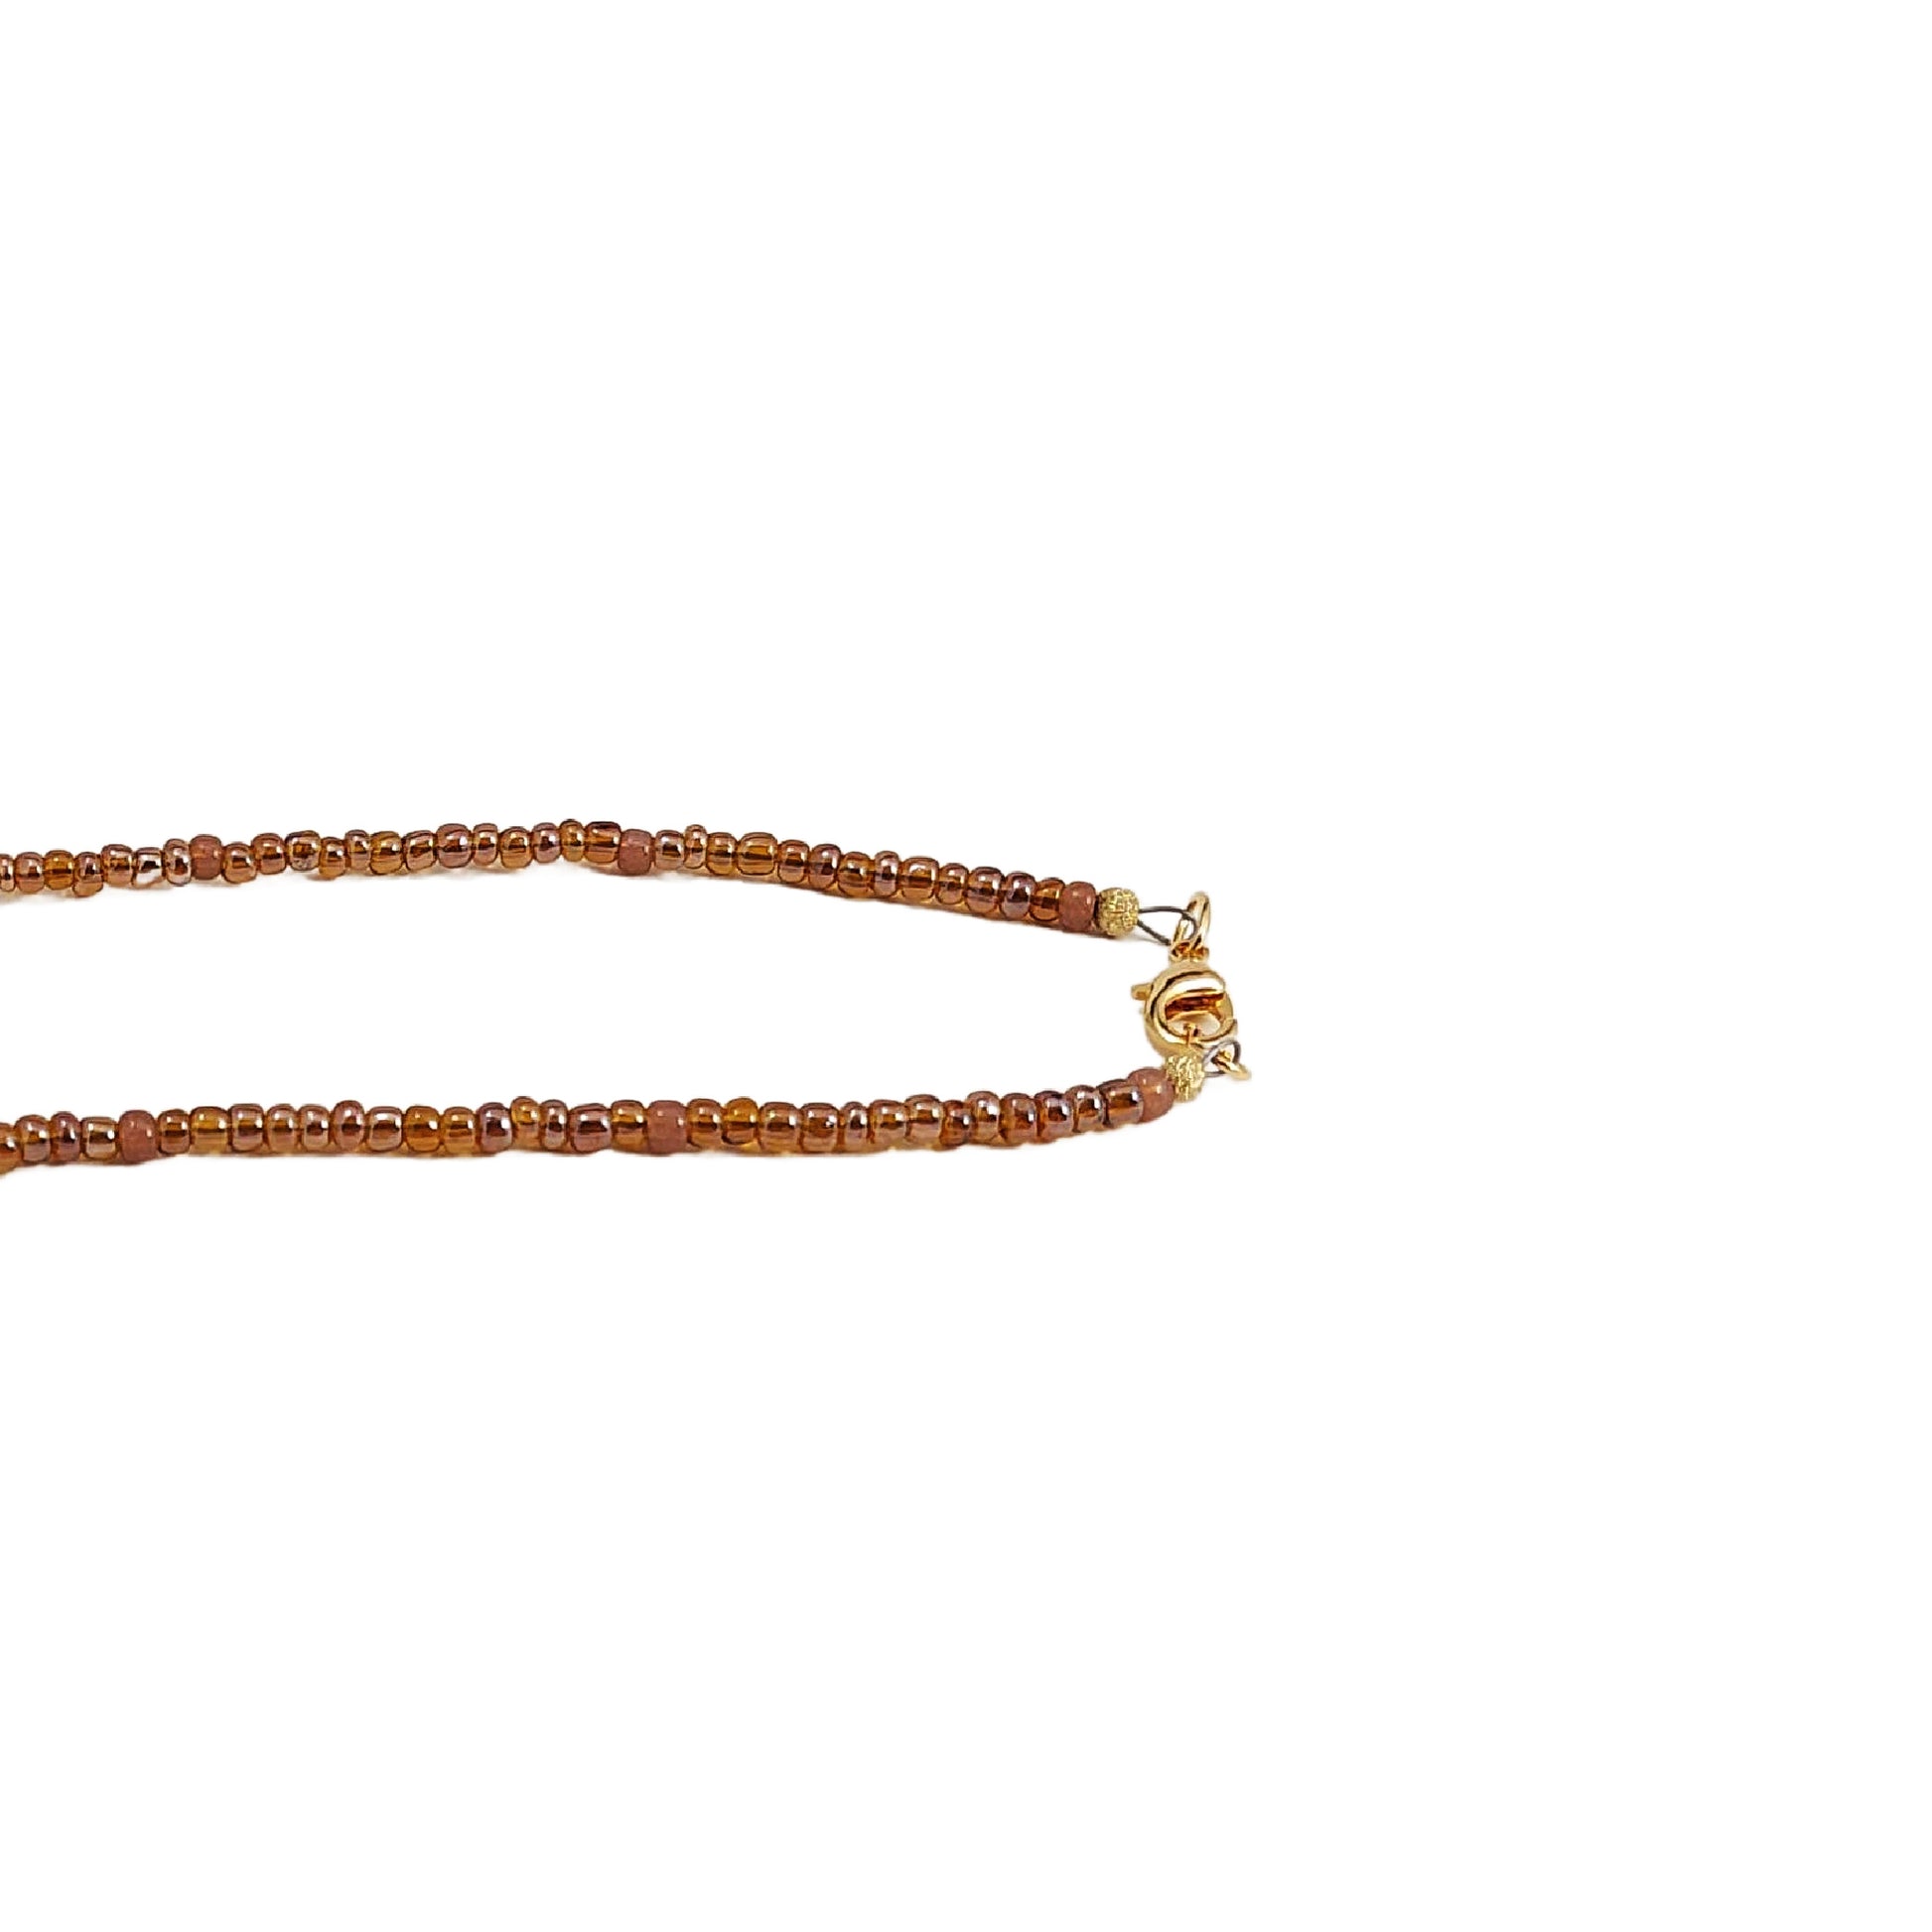 Rustic Leaves Bead Necklace, detail of gold-plated lobster clasp.  Free shipping in the US.